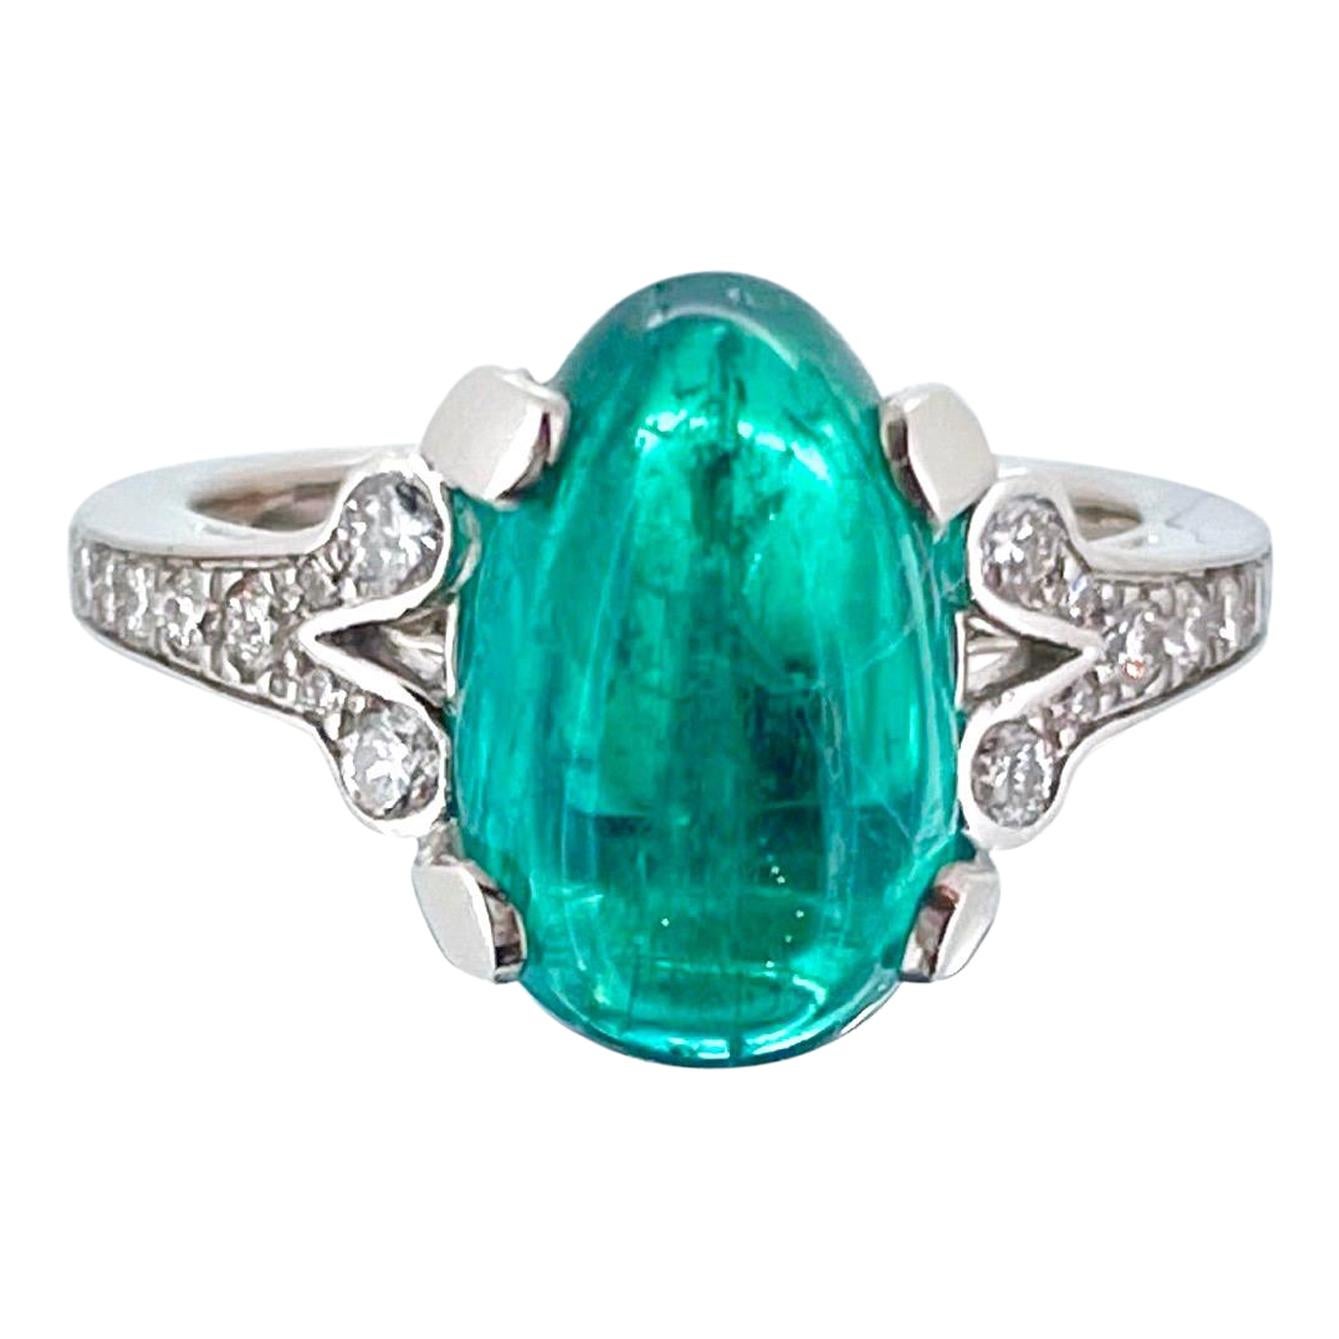 3.37ct Colombian Emerald Cabochon Cut and Diamonds Platinum Ring